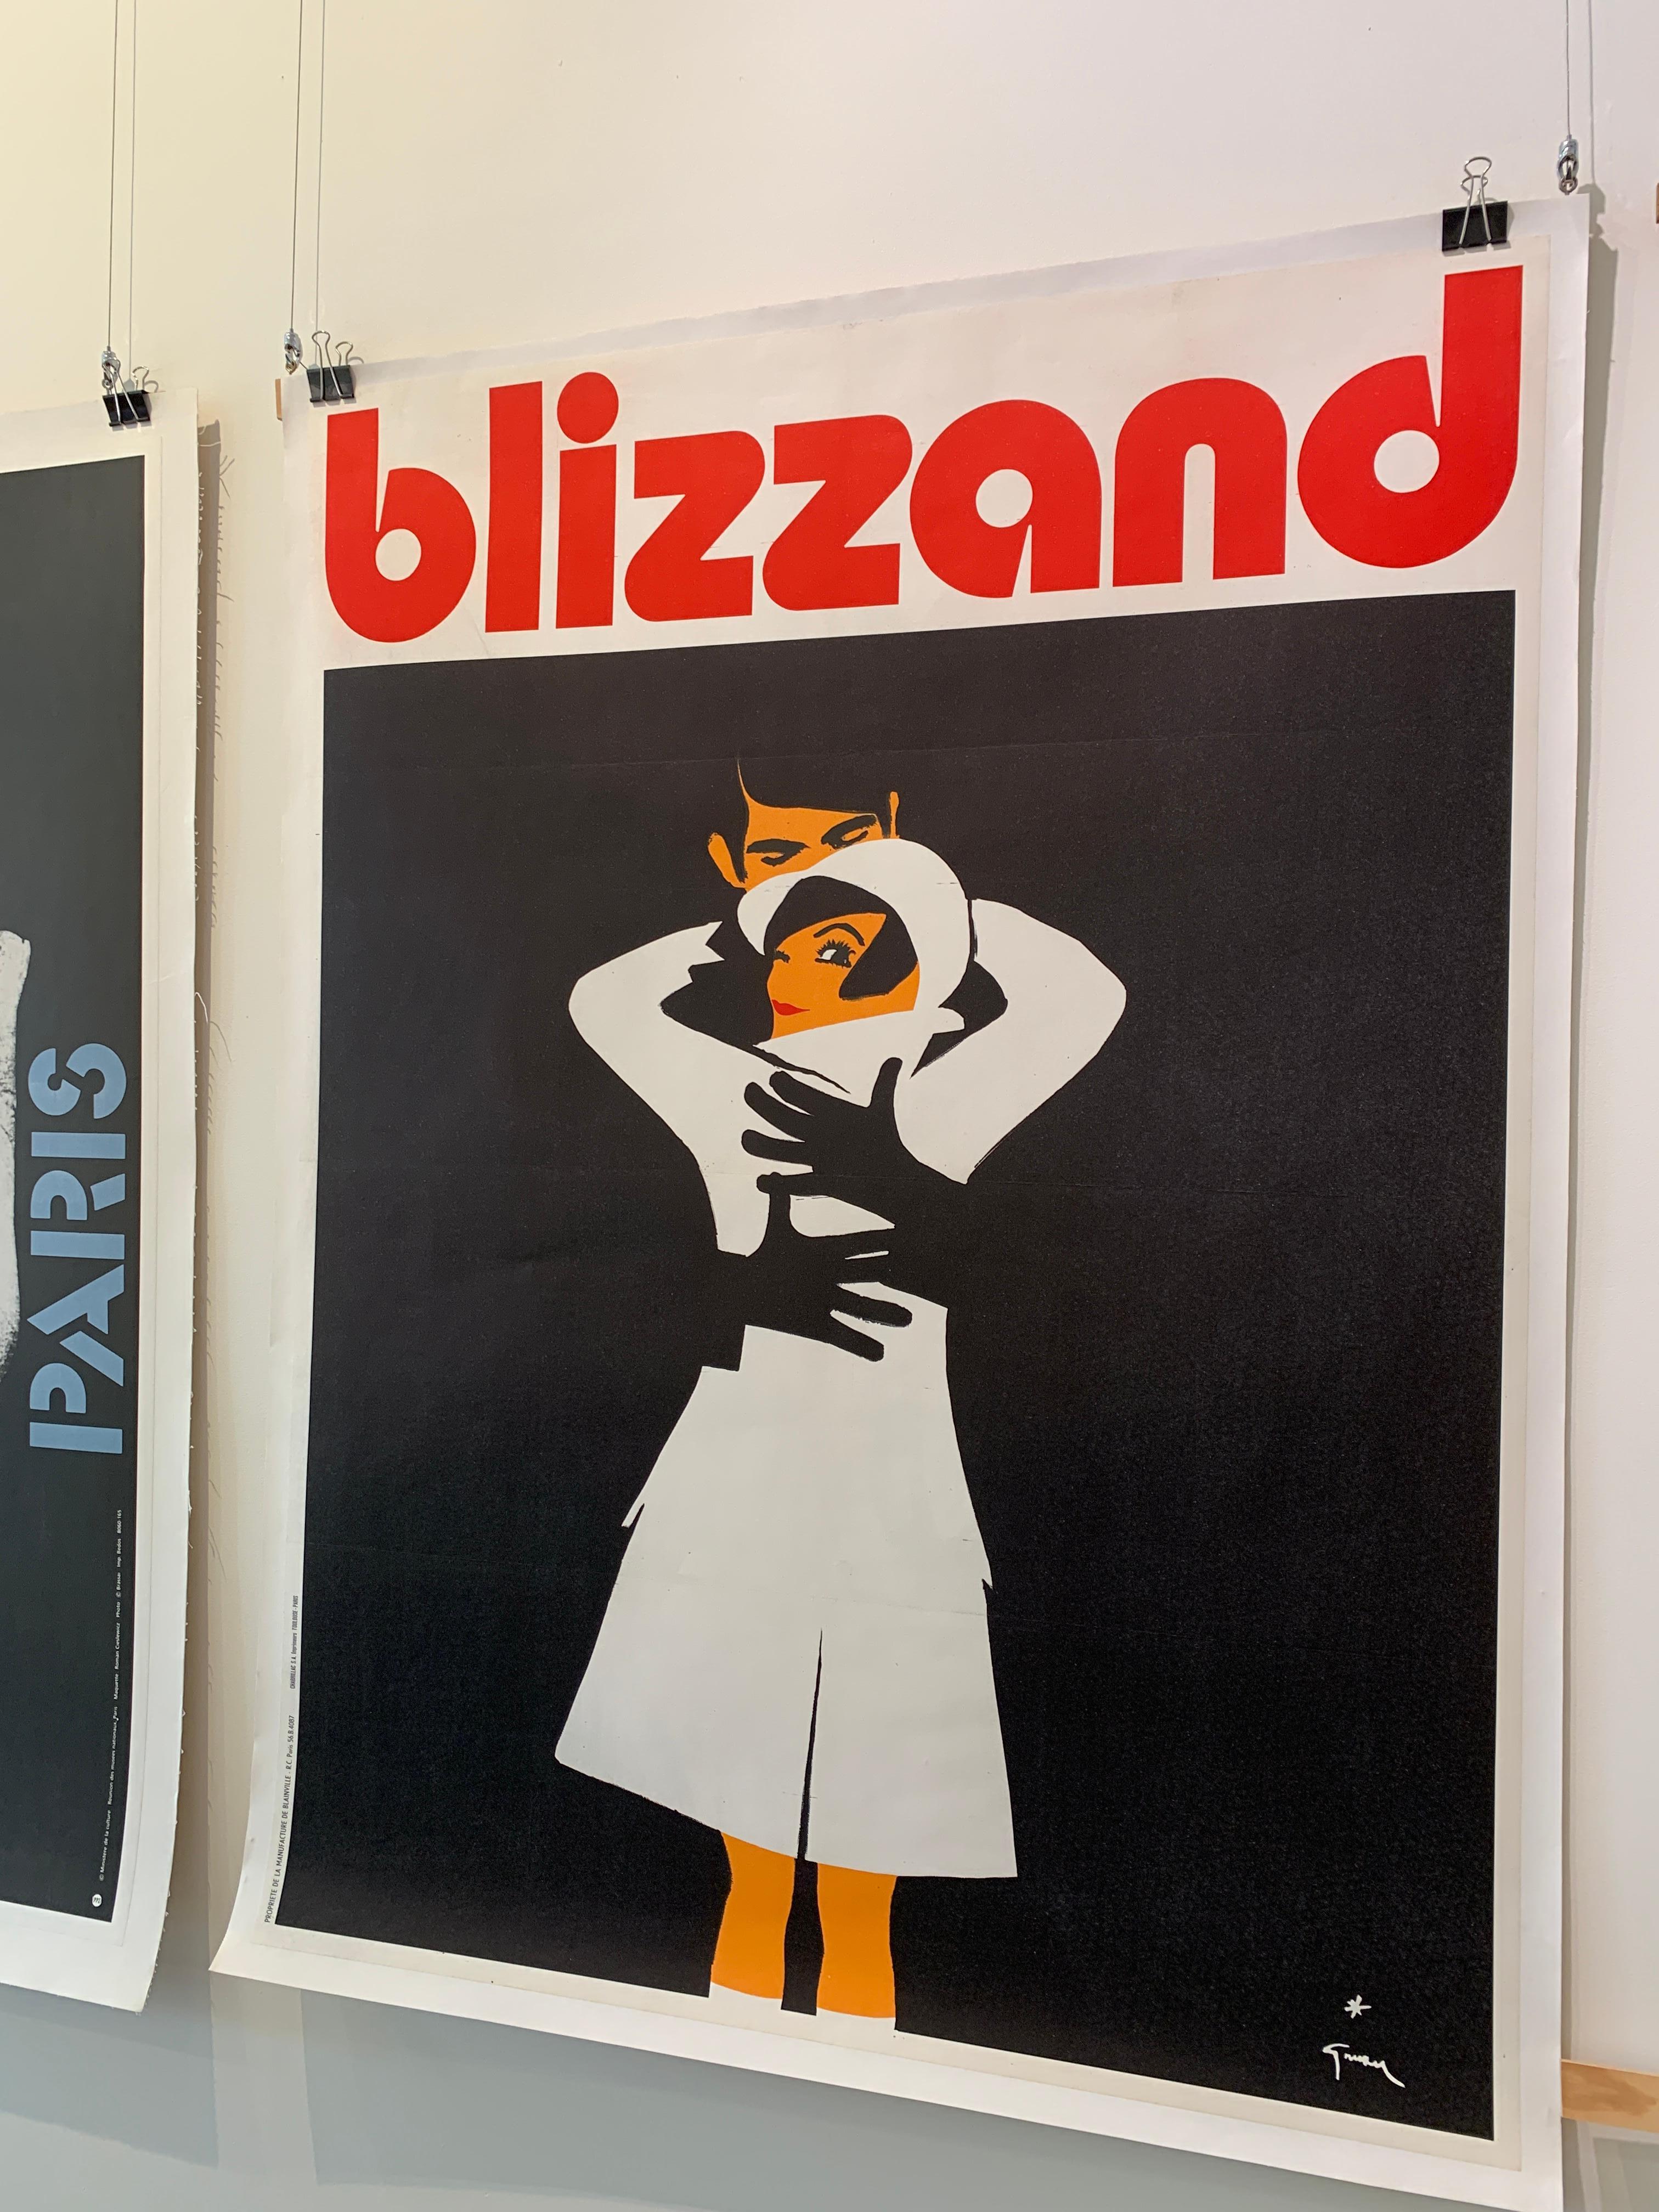 'BLIZZAND EMBRACE' Original Vintage Advertising Poster c. 1968 by GRUAU In Good Condition For Sale In Melbourne, Victoria